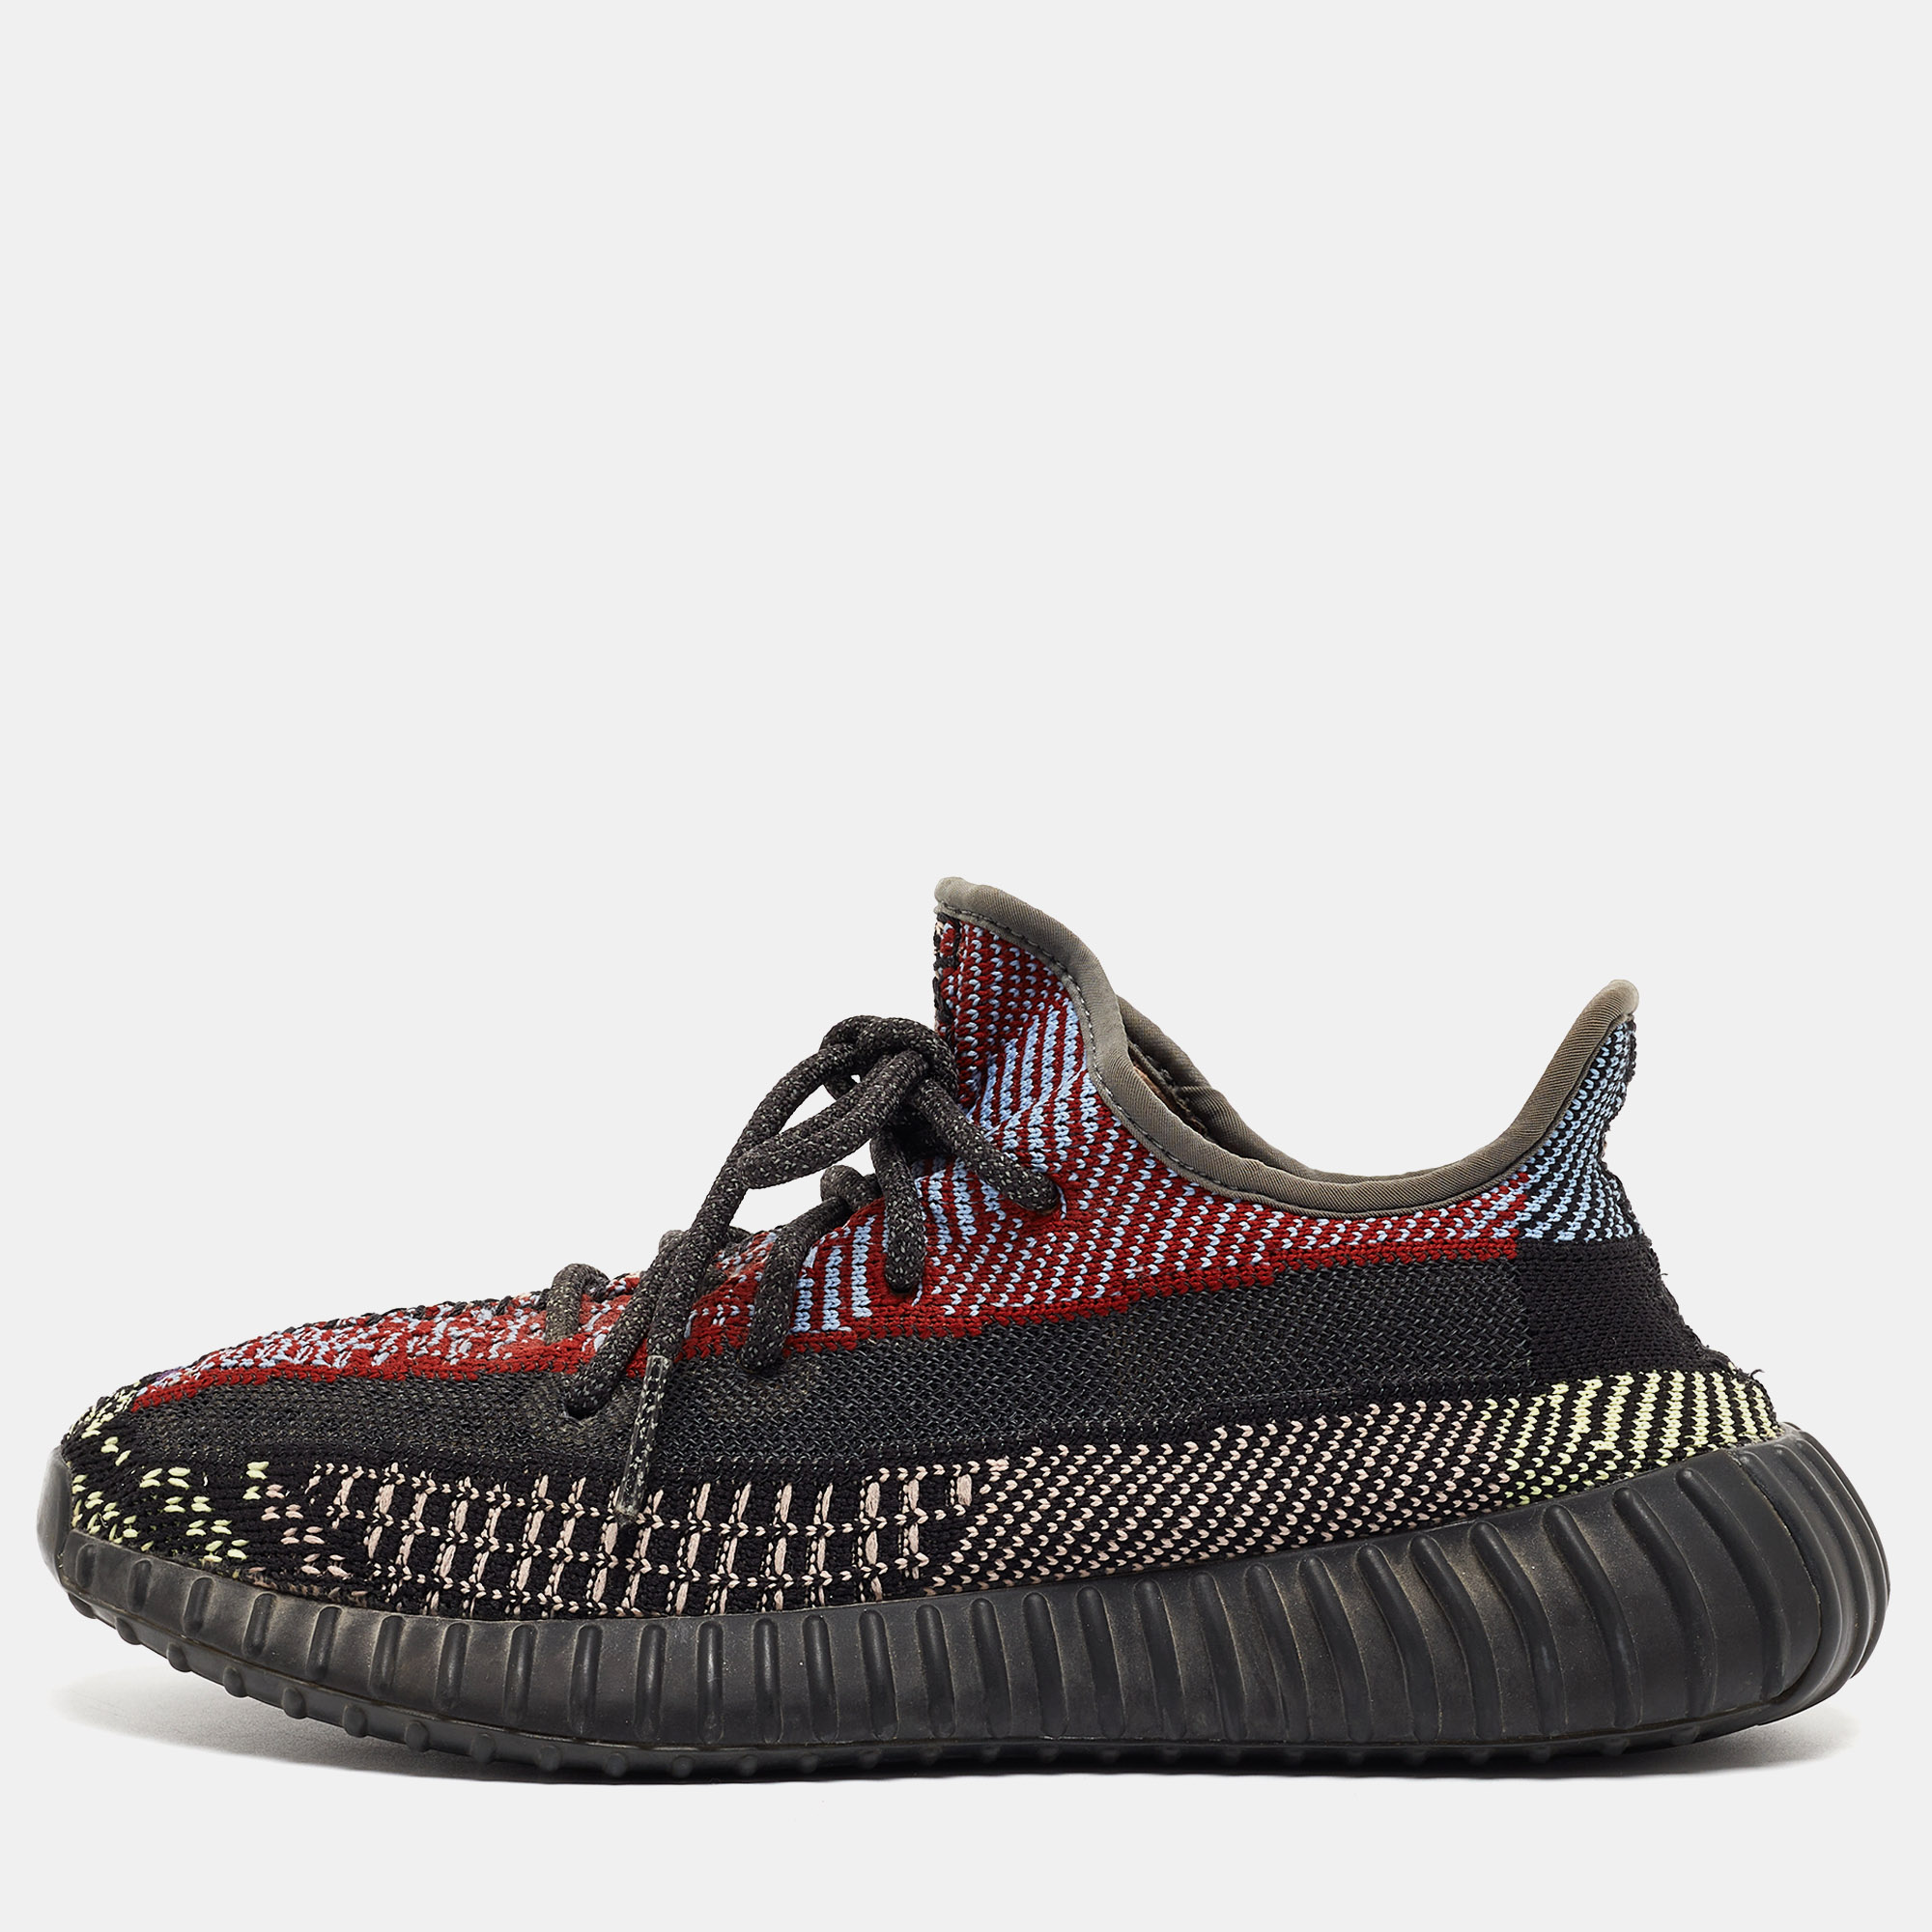 Pre-owned Yeezy X Adidas Multicolor Mesh And Fabric Boost 350 V2 Yecheil Reflective Trainers Size 40